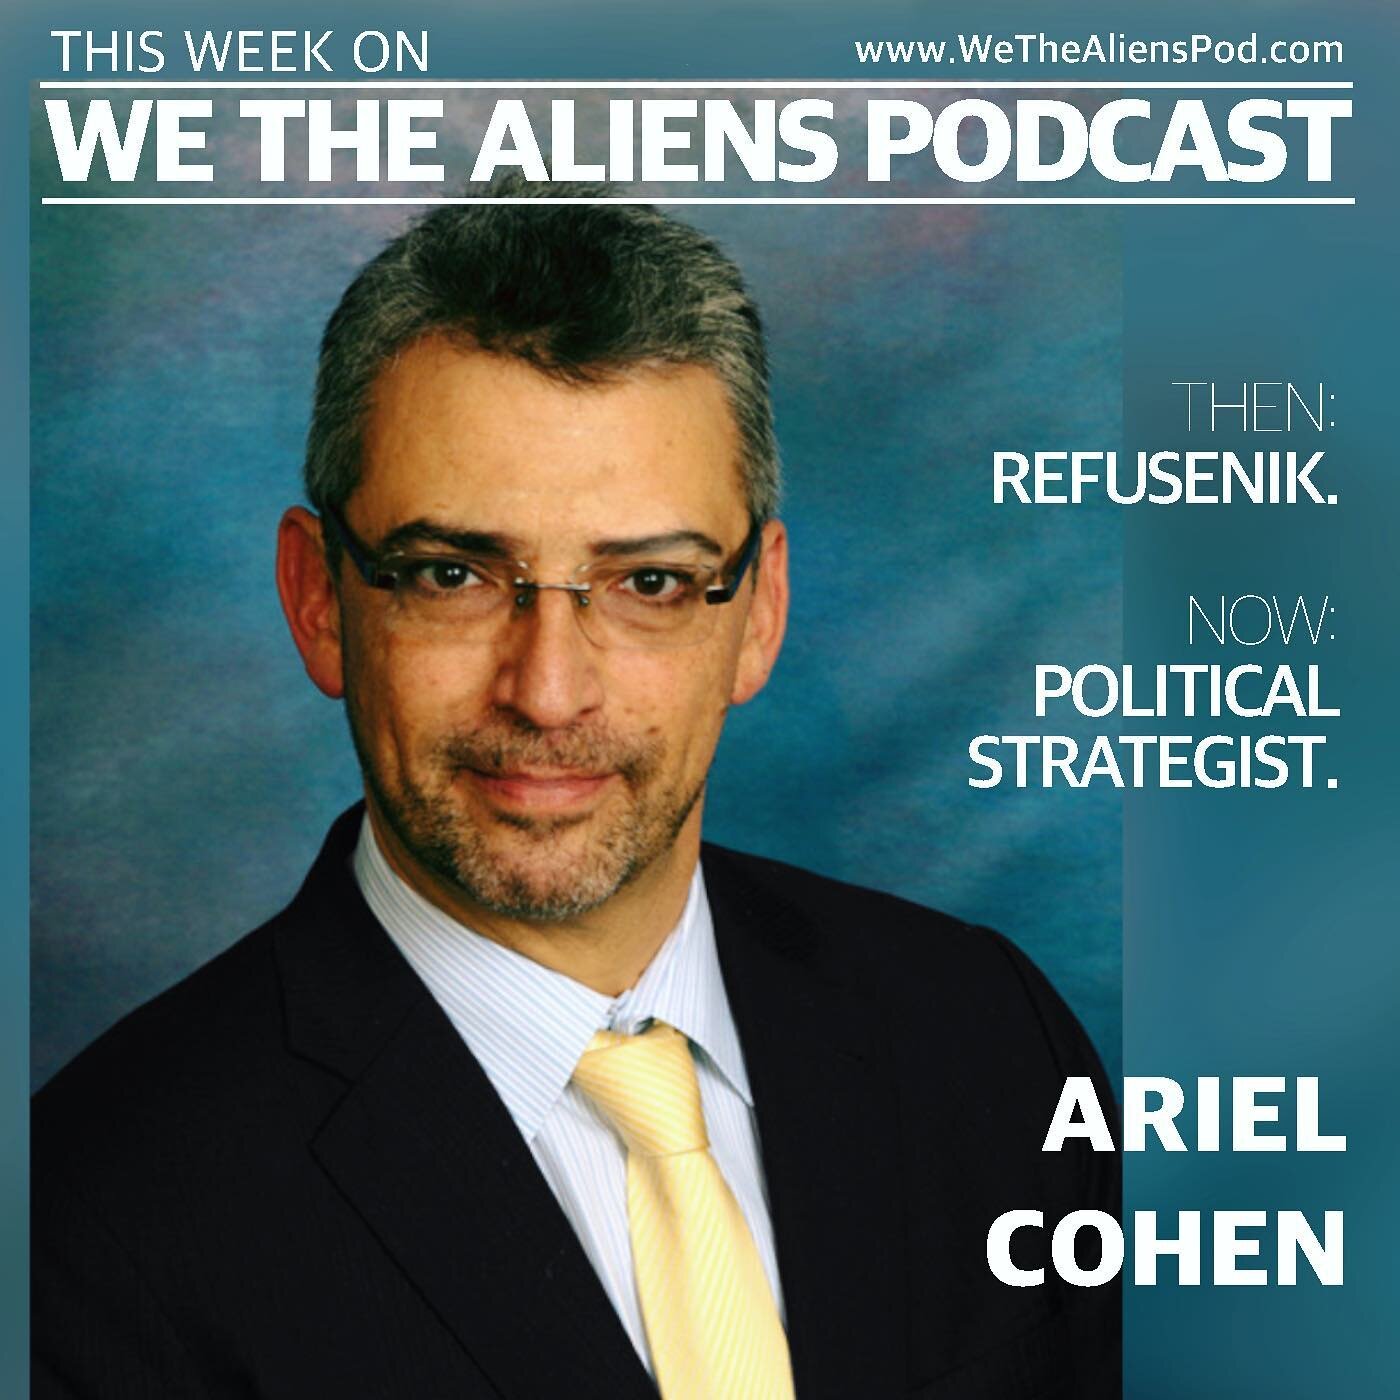 👑RUSSIA: THE UNFALLING EMPIRE.👑
.
.
Ariel Cohen is a Senior Fellow at the Atlantic Council and a Forbes columnist.
.
PART 1 - Ariel shared what it was like to be a refusenik in USSR and what it took to get out. And honestly, even though I kinda kne